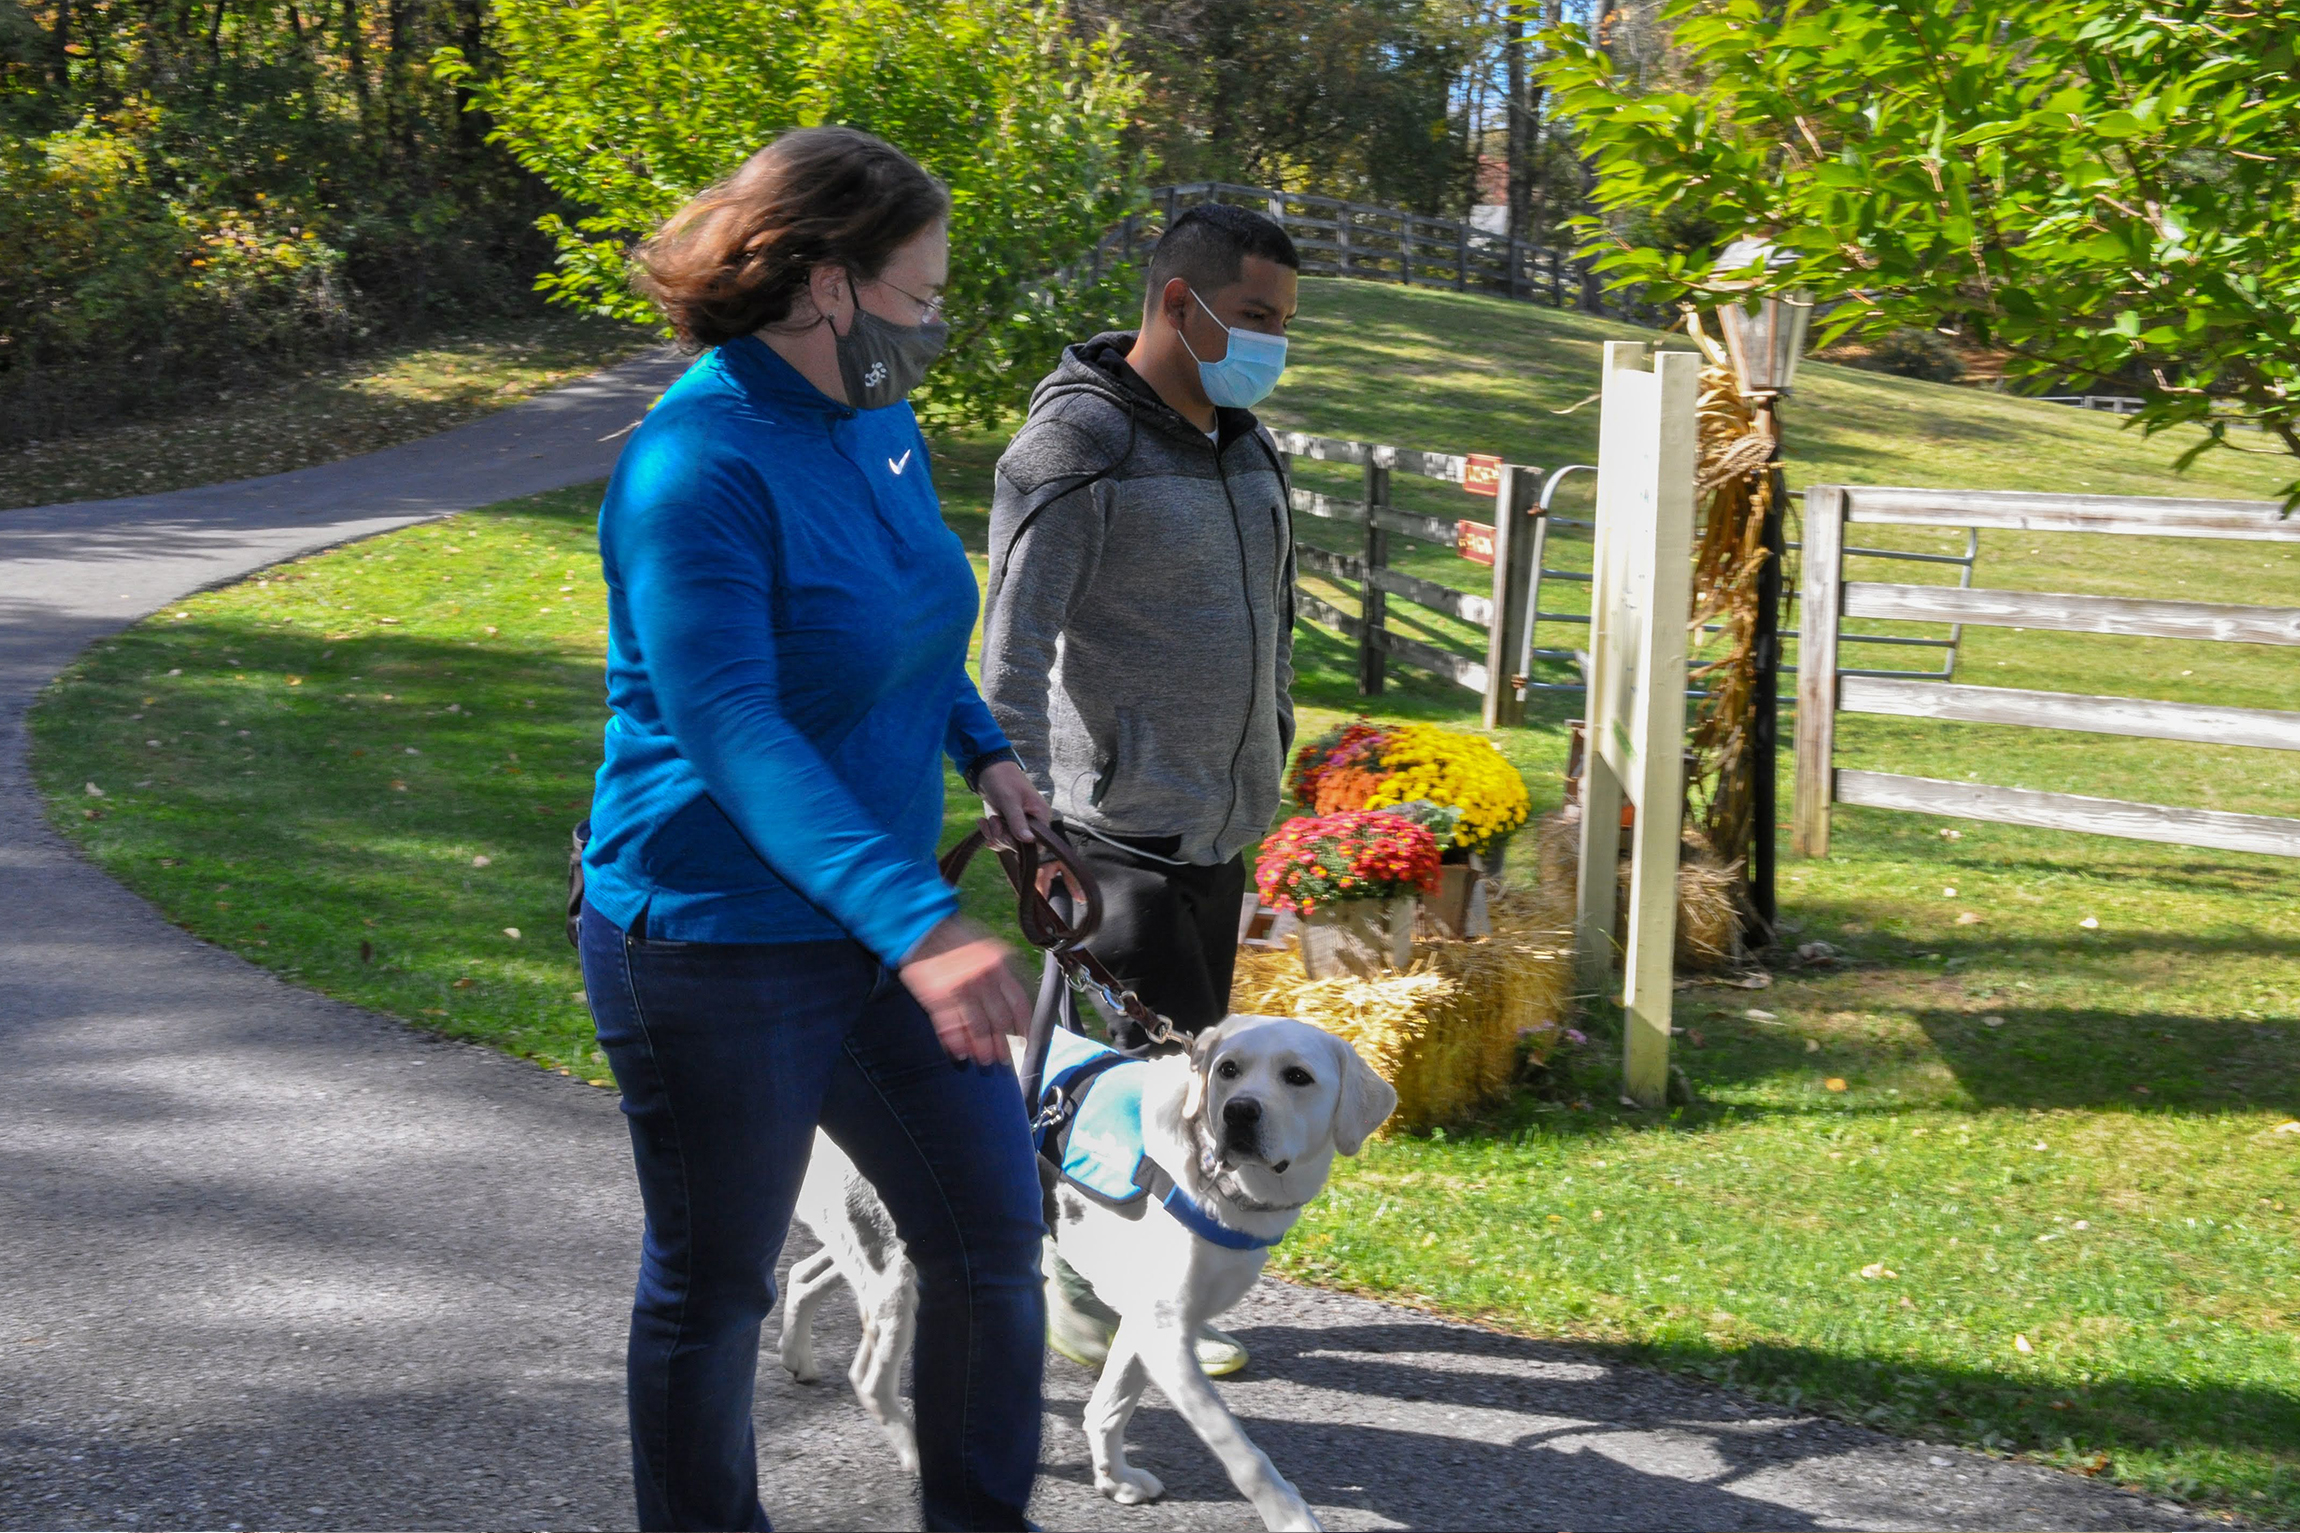 Dog walking teaches the life skills of responsibility and caring for a pet.